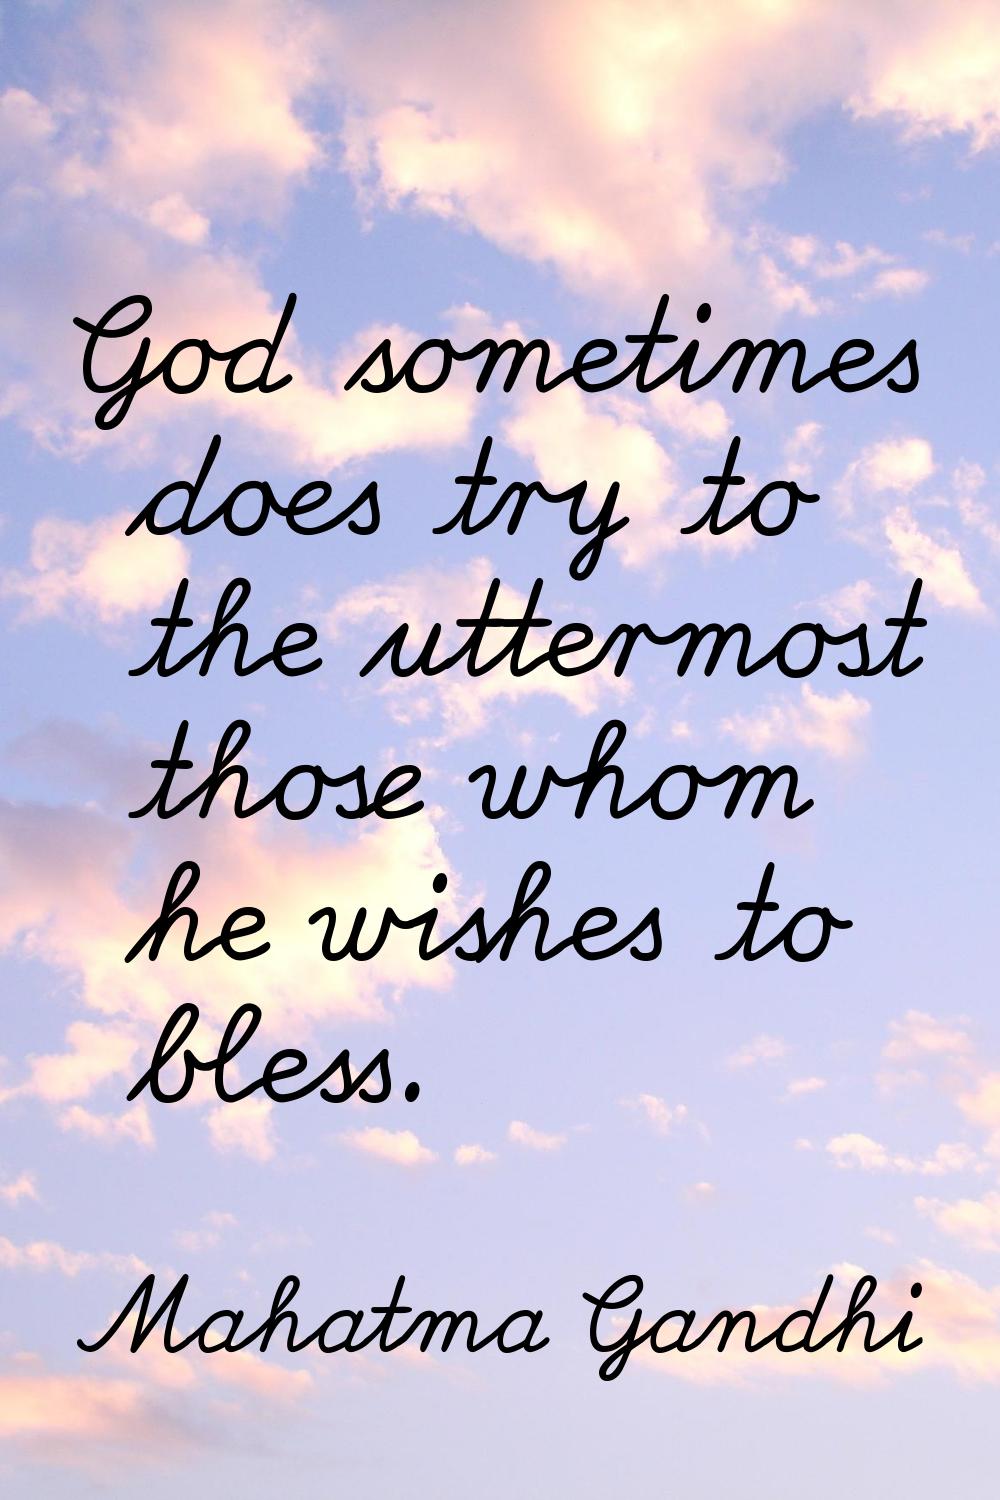 God sometimes does try to the uttermost those whom he wishes to bless.